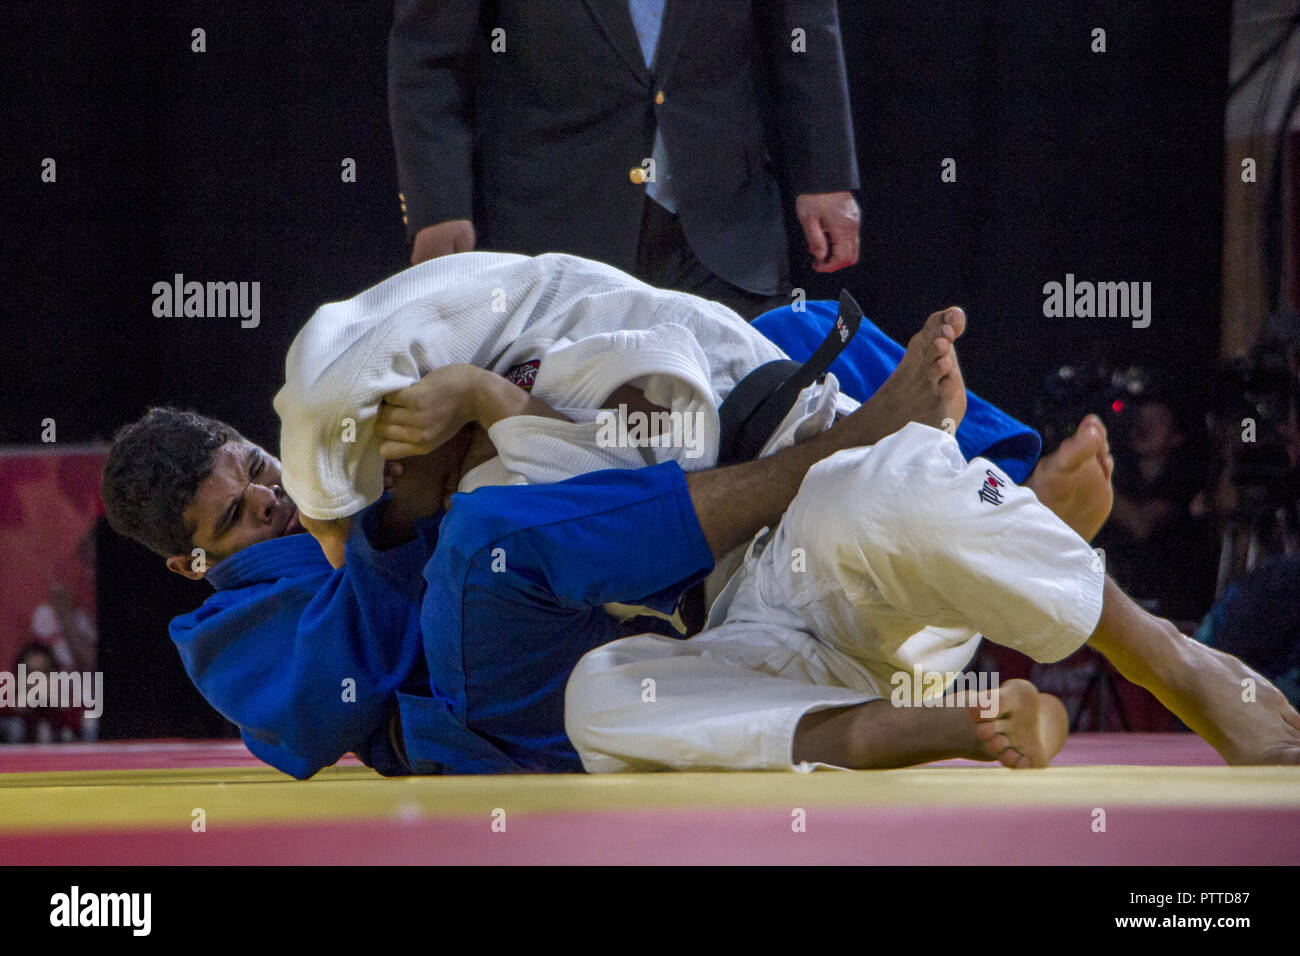 Buenos Aires, Federal Capital, Argentina. 10th Oct, 2018. Finals of mixed teams of international judo. The Venezuelan Paez Calos (Blue), member of the team Beijing, winner of the gold medal, faces the Athens team fighter, winner of the silver medal, the Czech Bezdek Martin Credit: Roberto Almeida Aveledo/ZUMA Wire/Alamy Live News Stock Photo